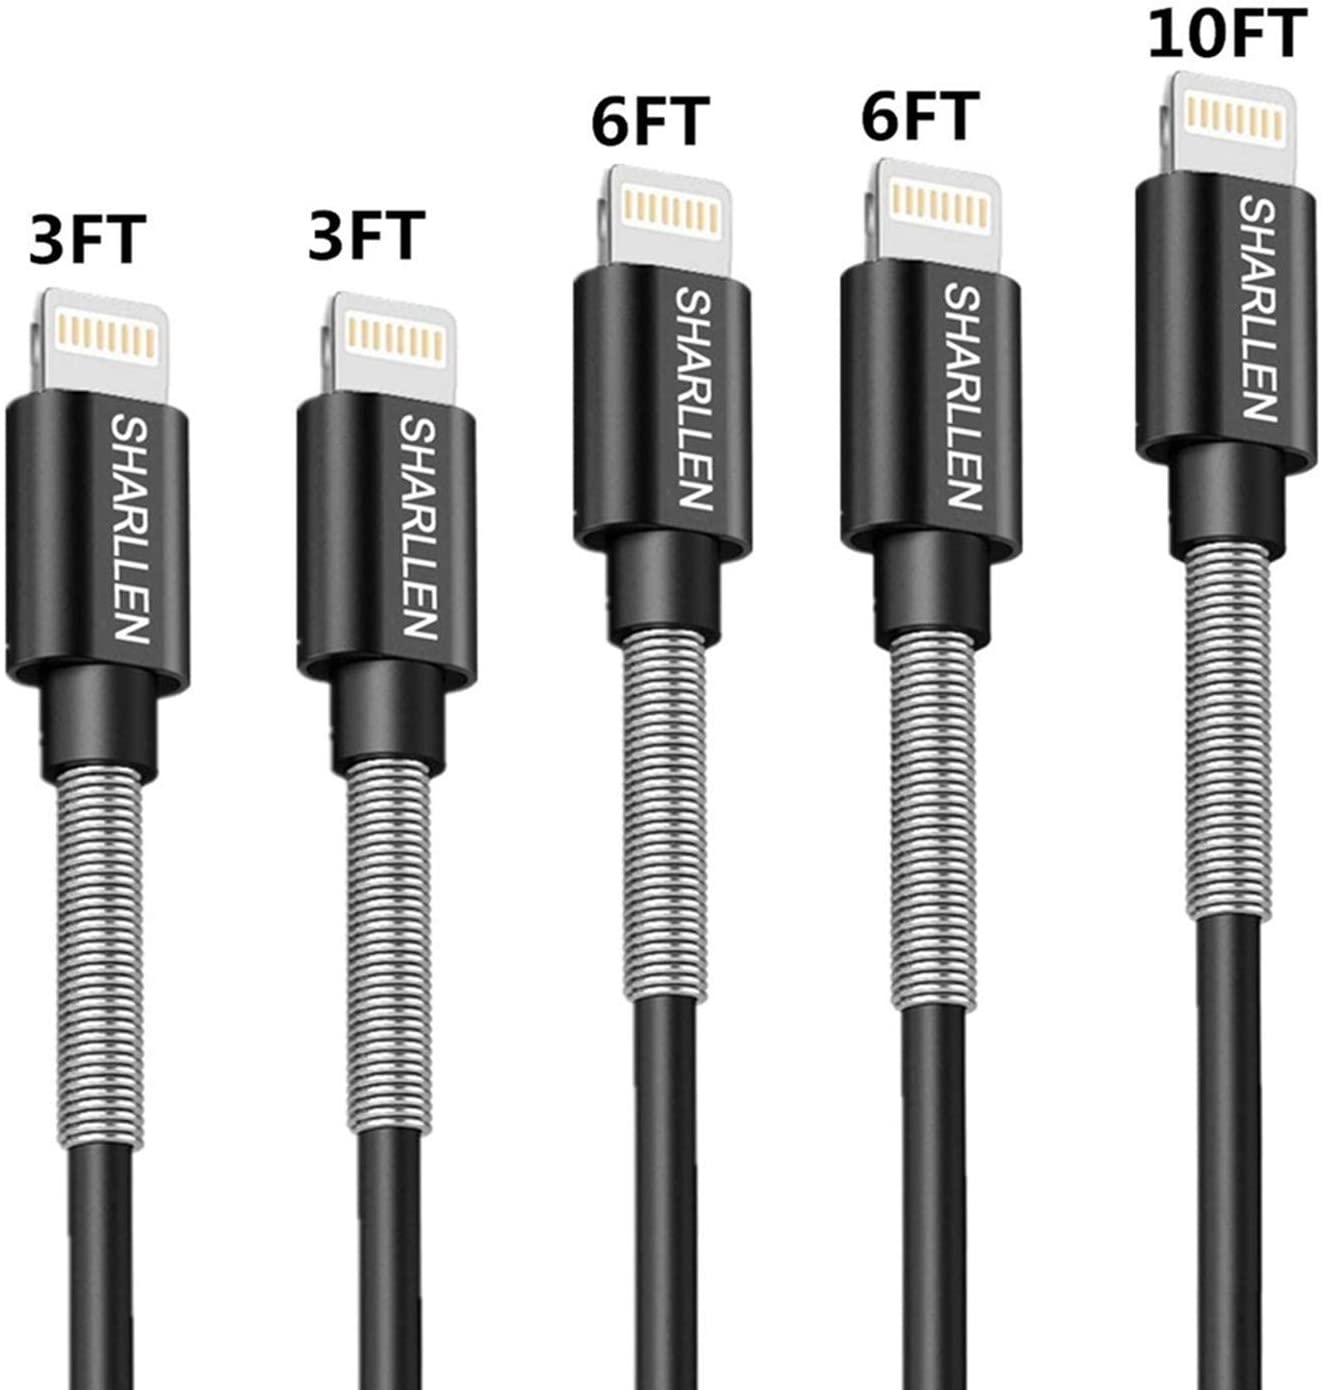 iPhone Sharllen Metal Spring iPhone Charger Cable Lightning Cable 3FT/6FT/10FT Long iPhone Charging Cord Data Wire Compatible iPhone 11/XS/Max/X/8/8Plus/7/7P/6/6 P/6S/iPad Black